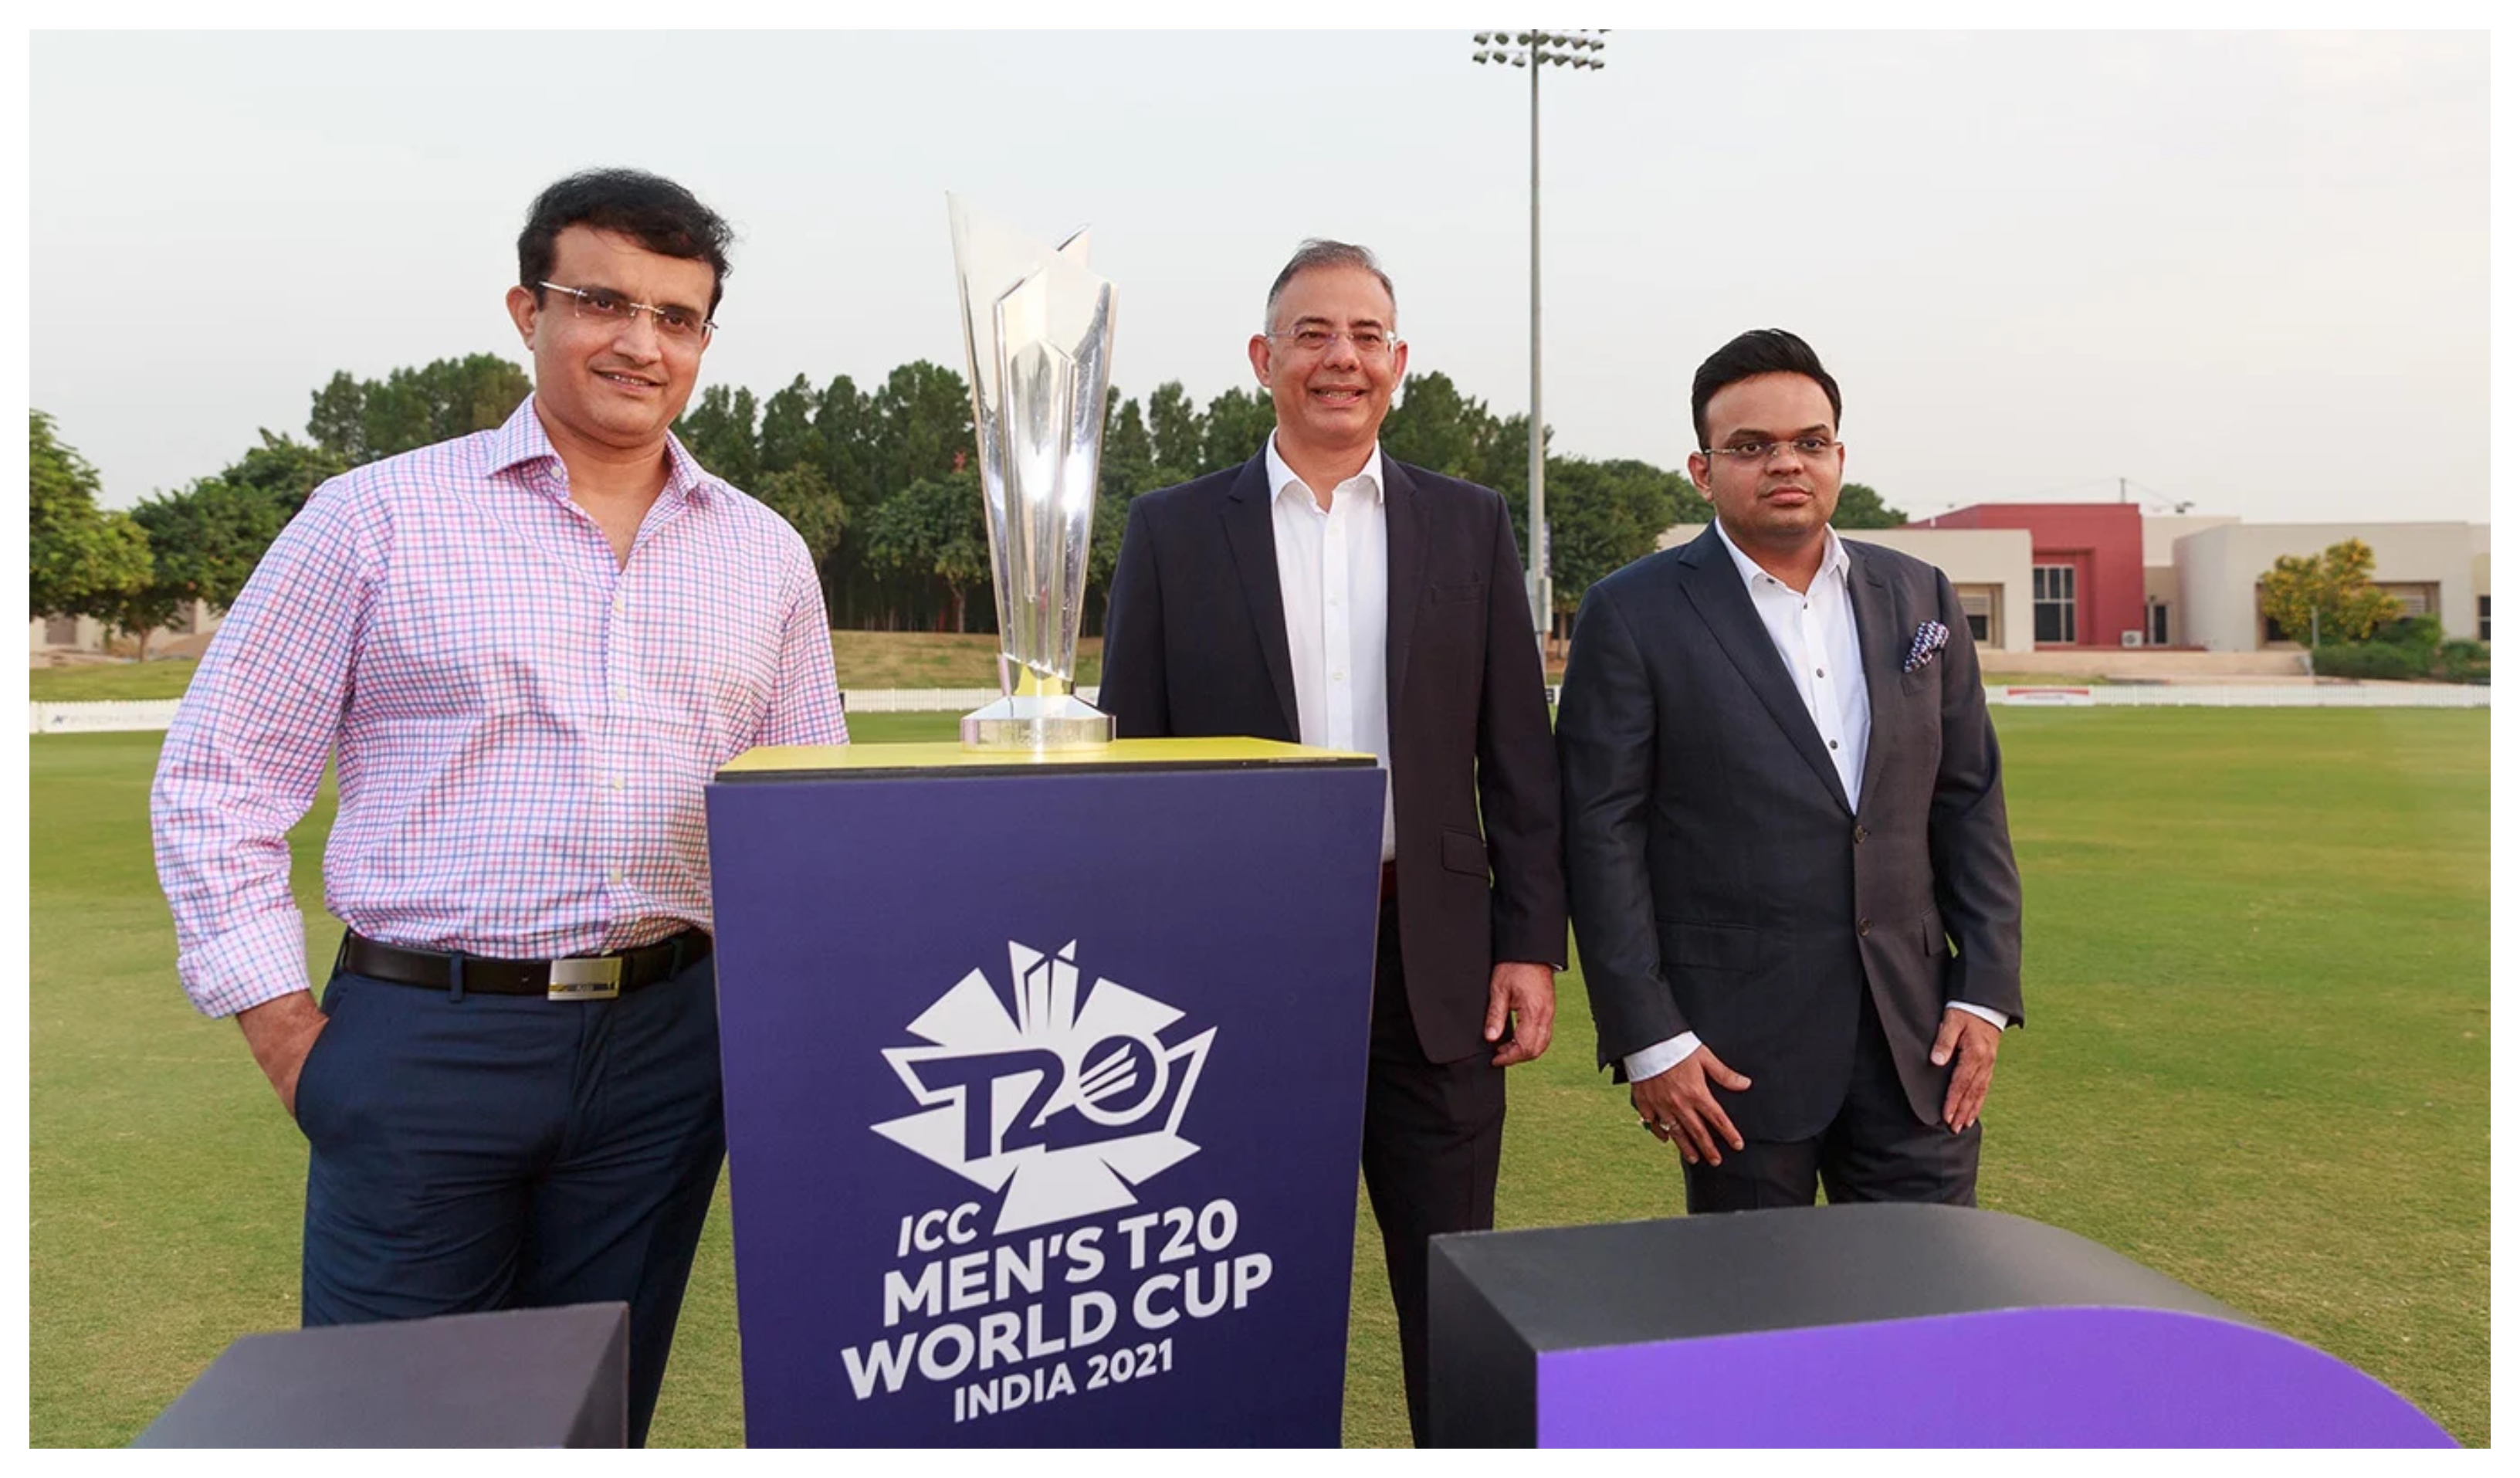 ICC T20 World Cup 2021 will be held in UAE | ICC/Twitter